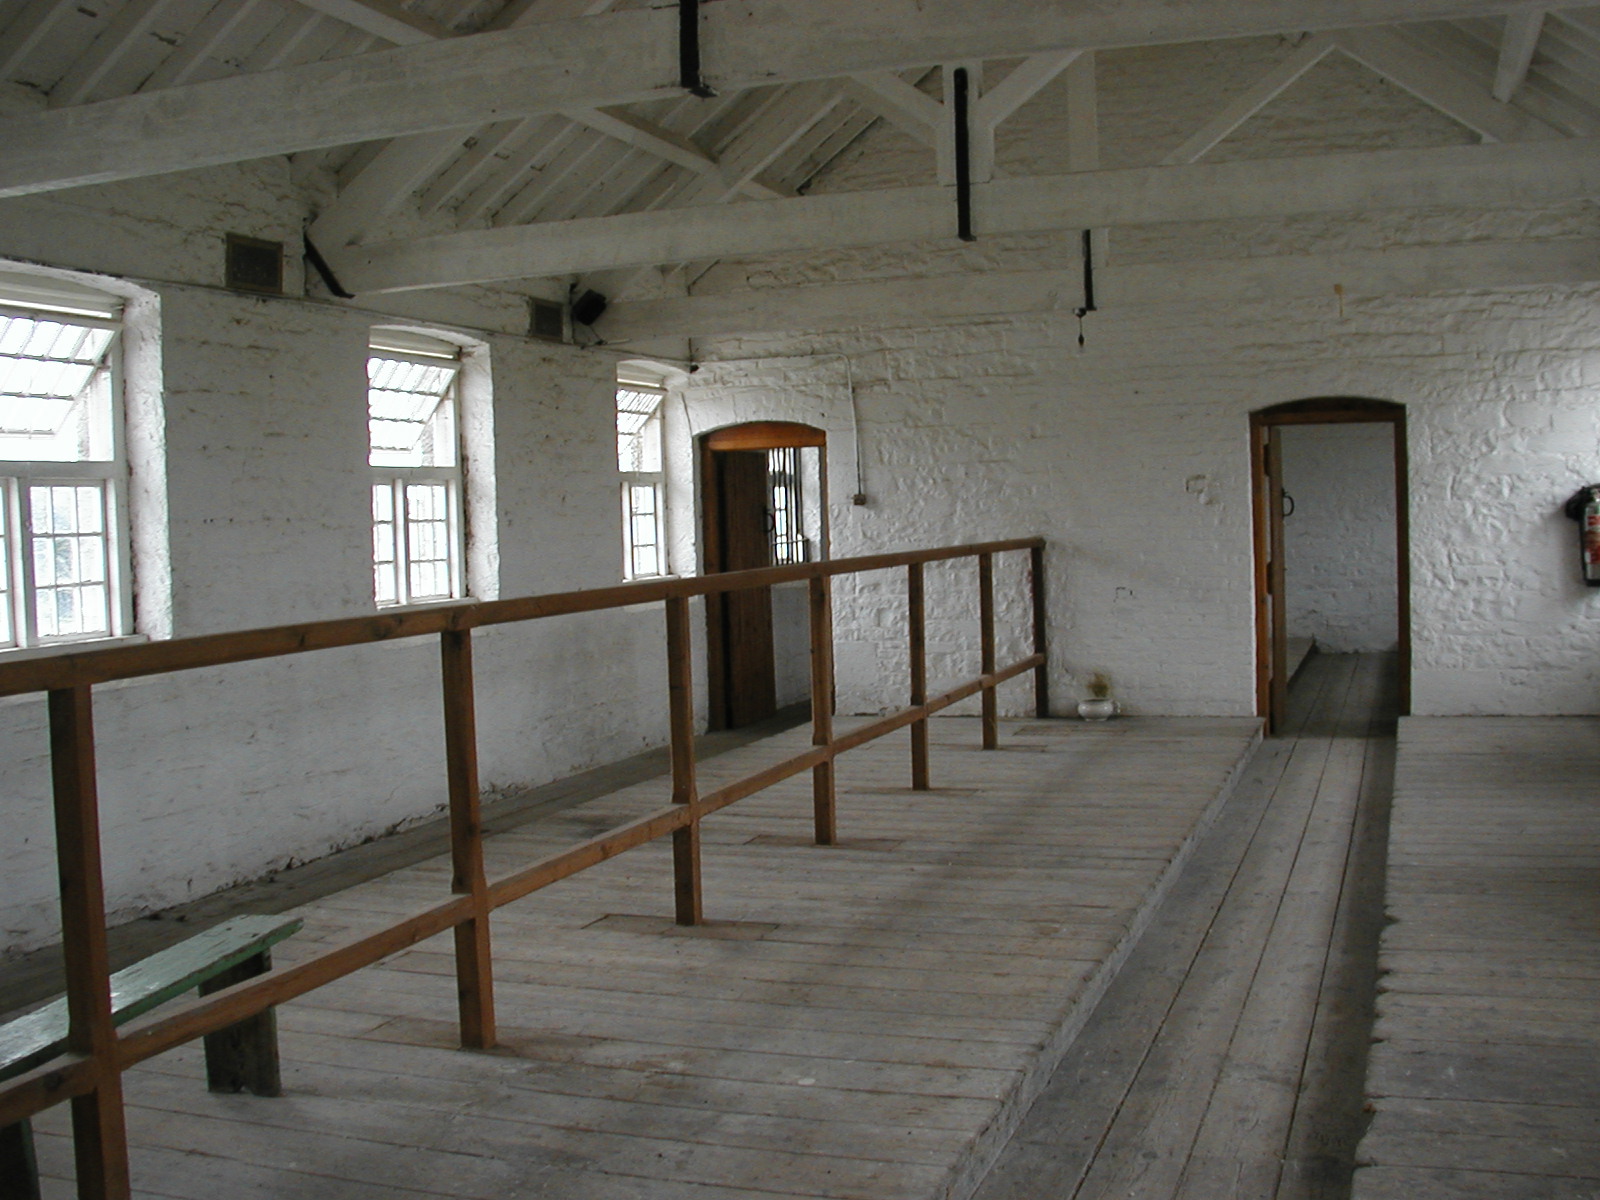 Donaghmore workhouse2 11 5 04